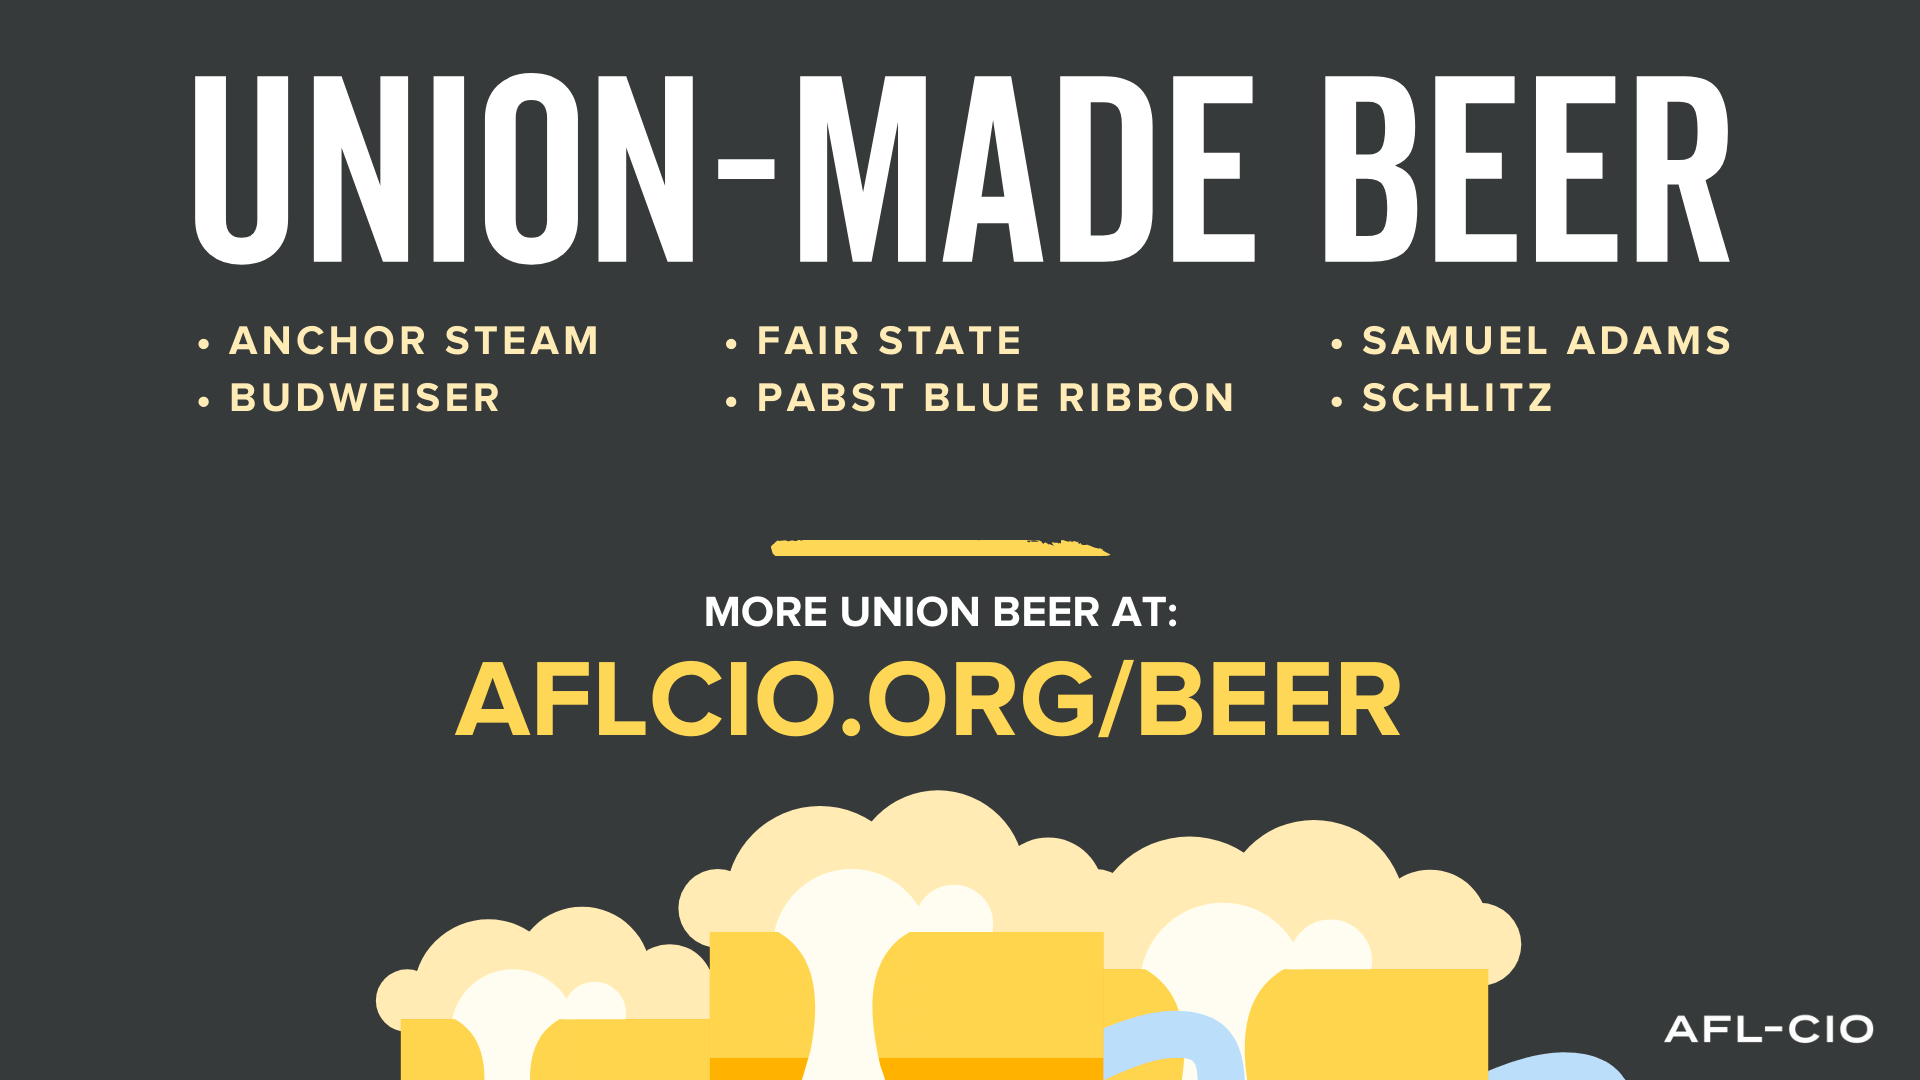 Union-Made Beer